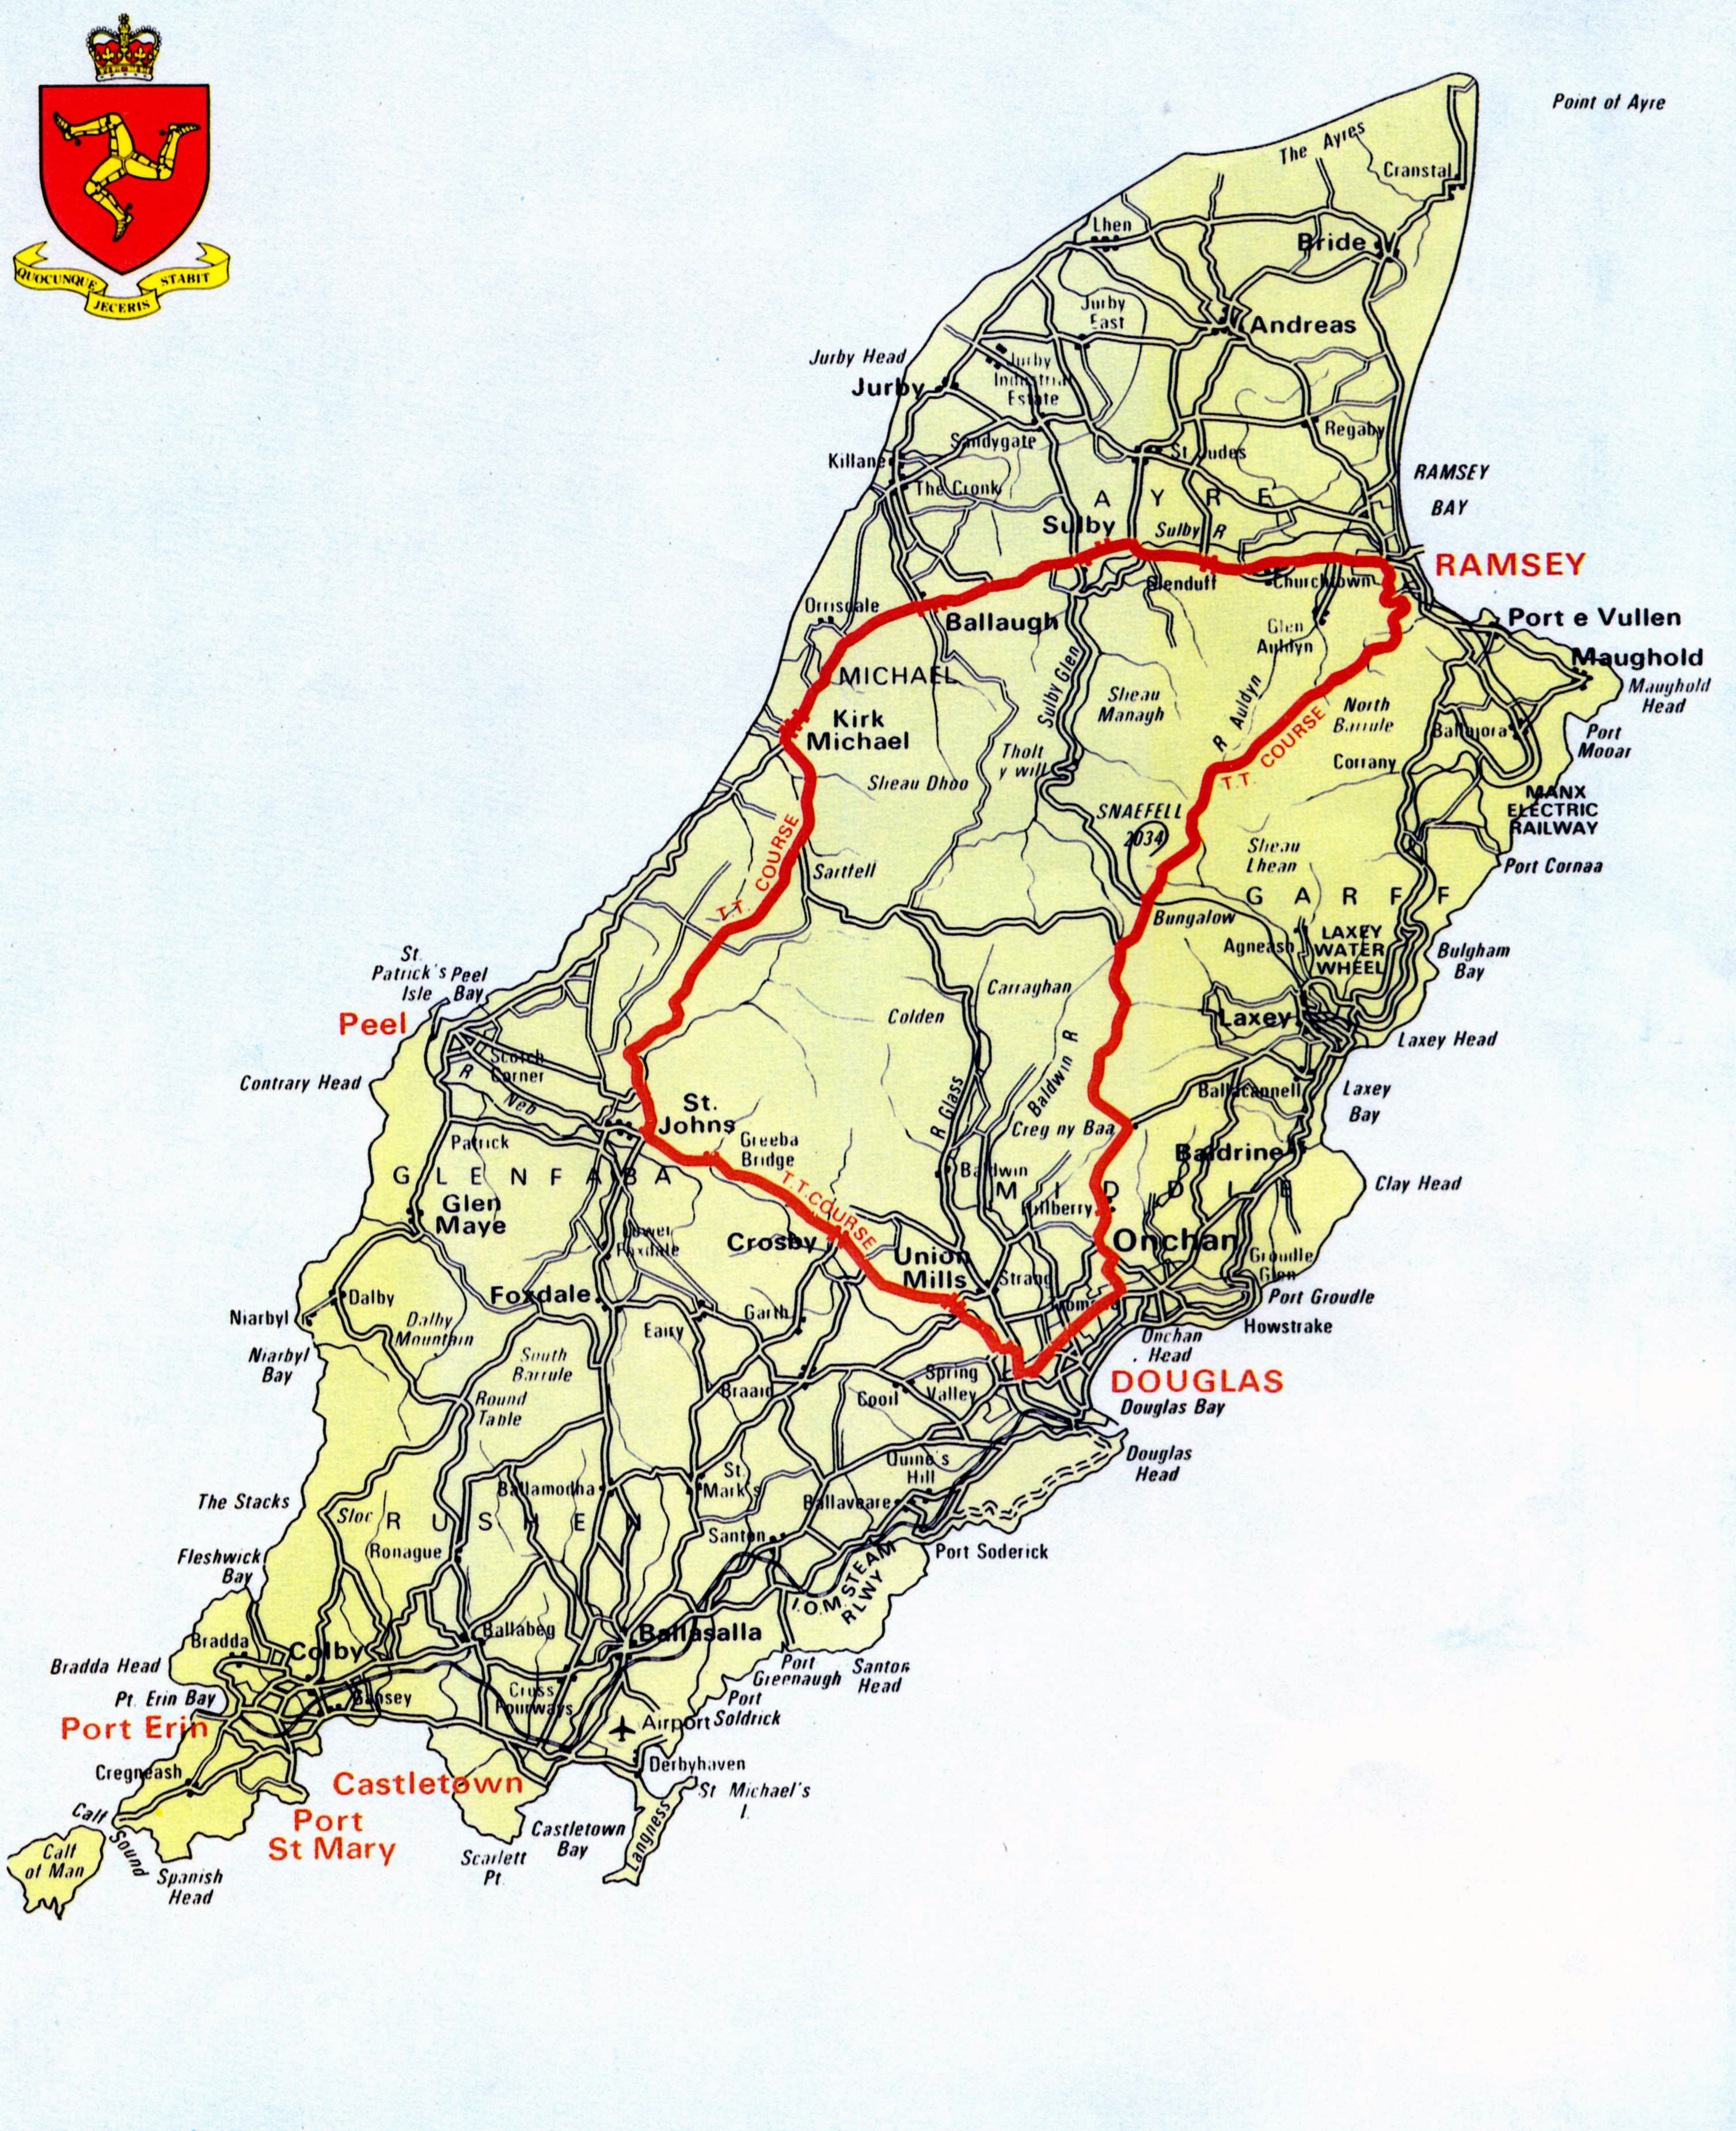 the isle of man map Large Scale Road Map Of Isle Of Man Isle Of Man Europe the isle of man map